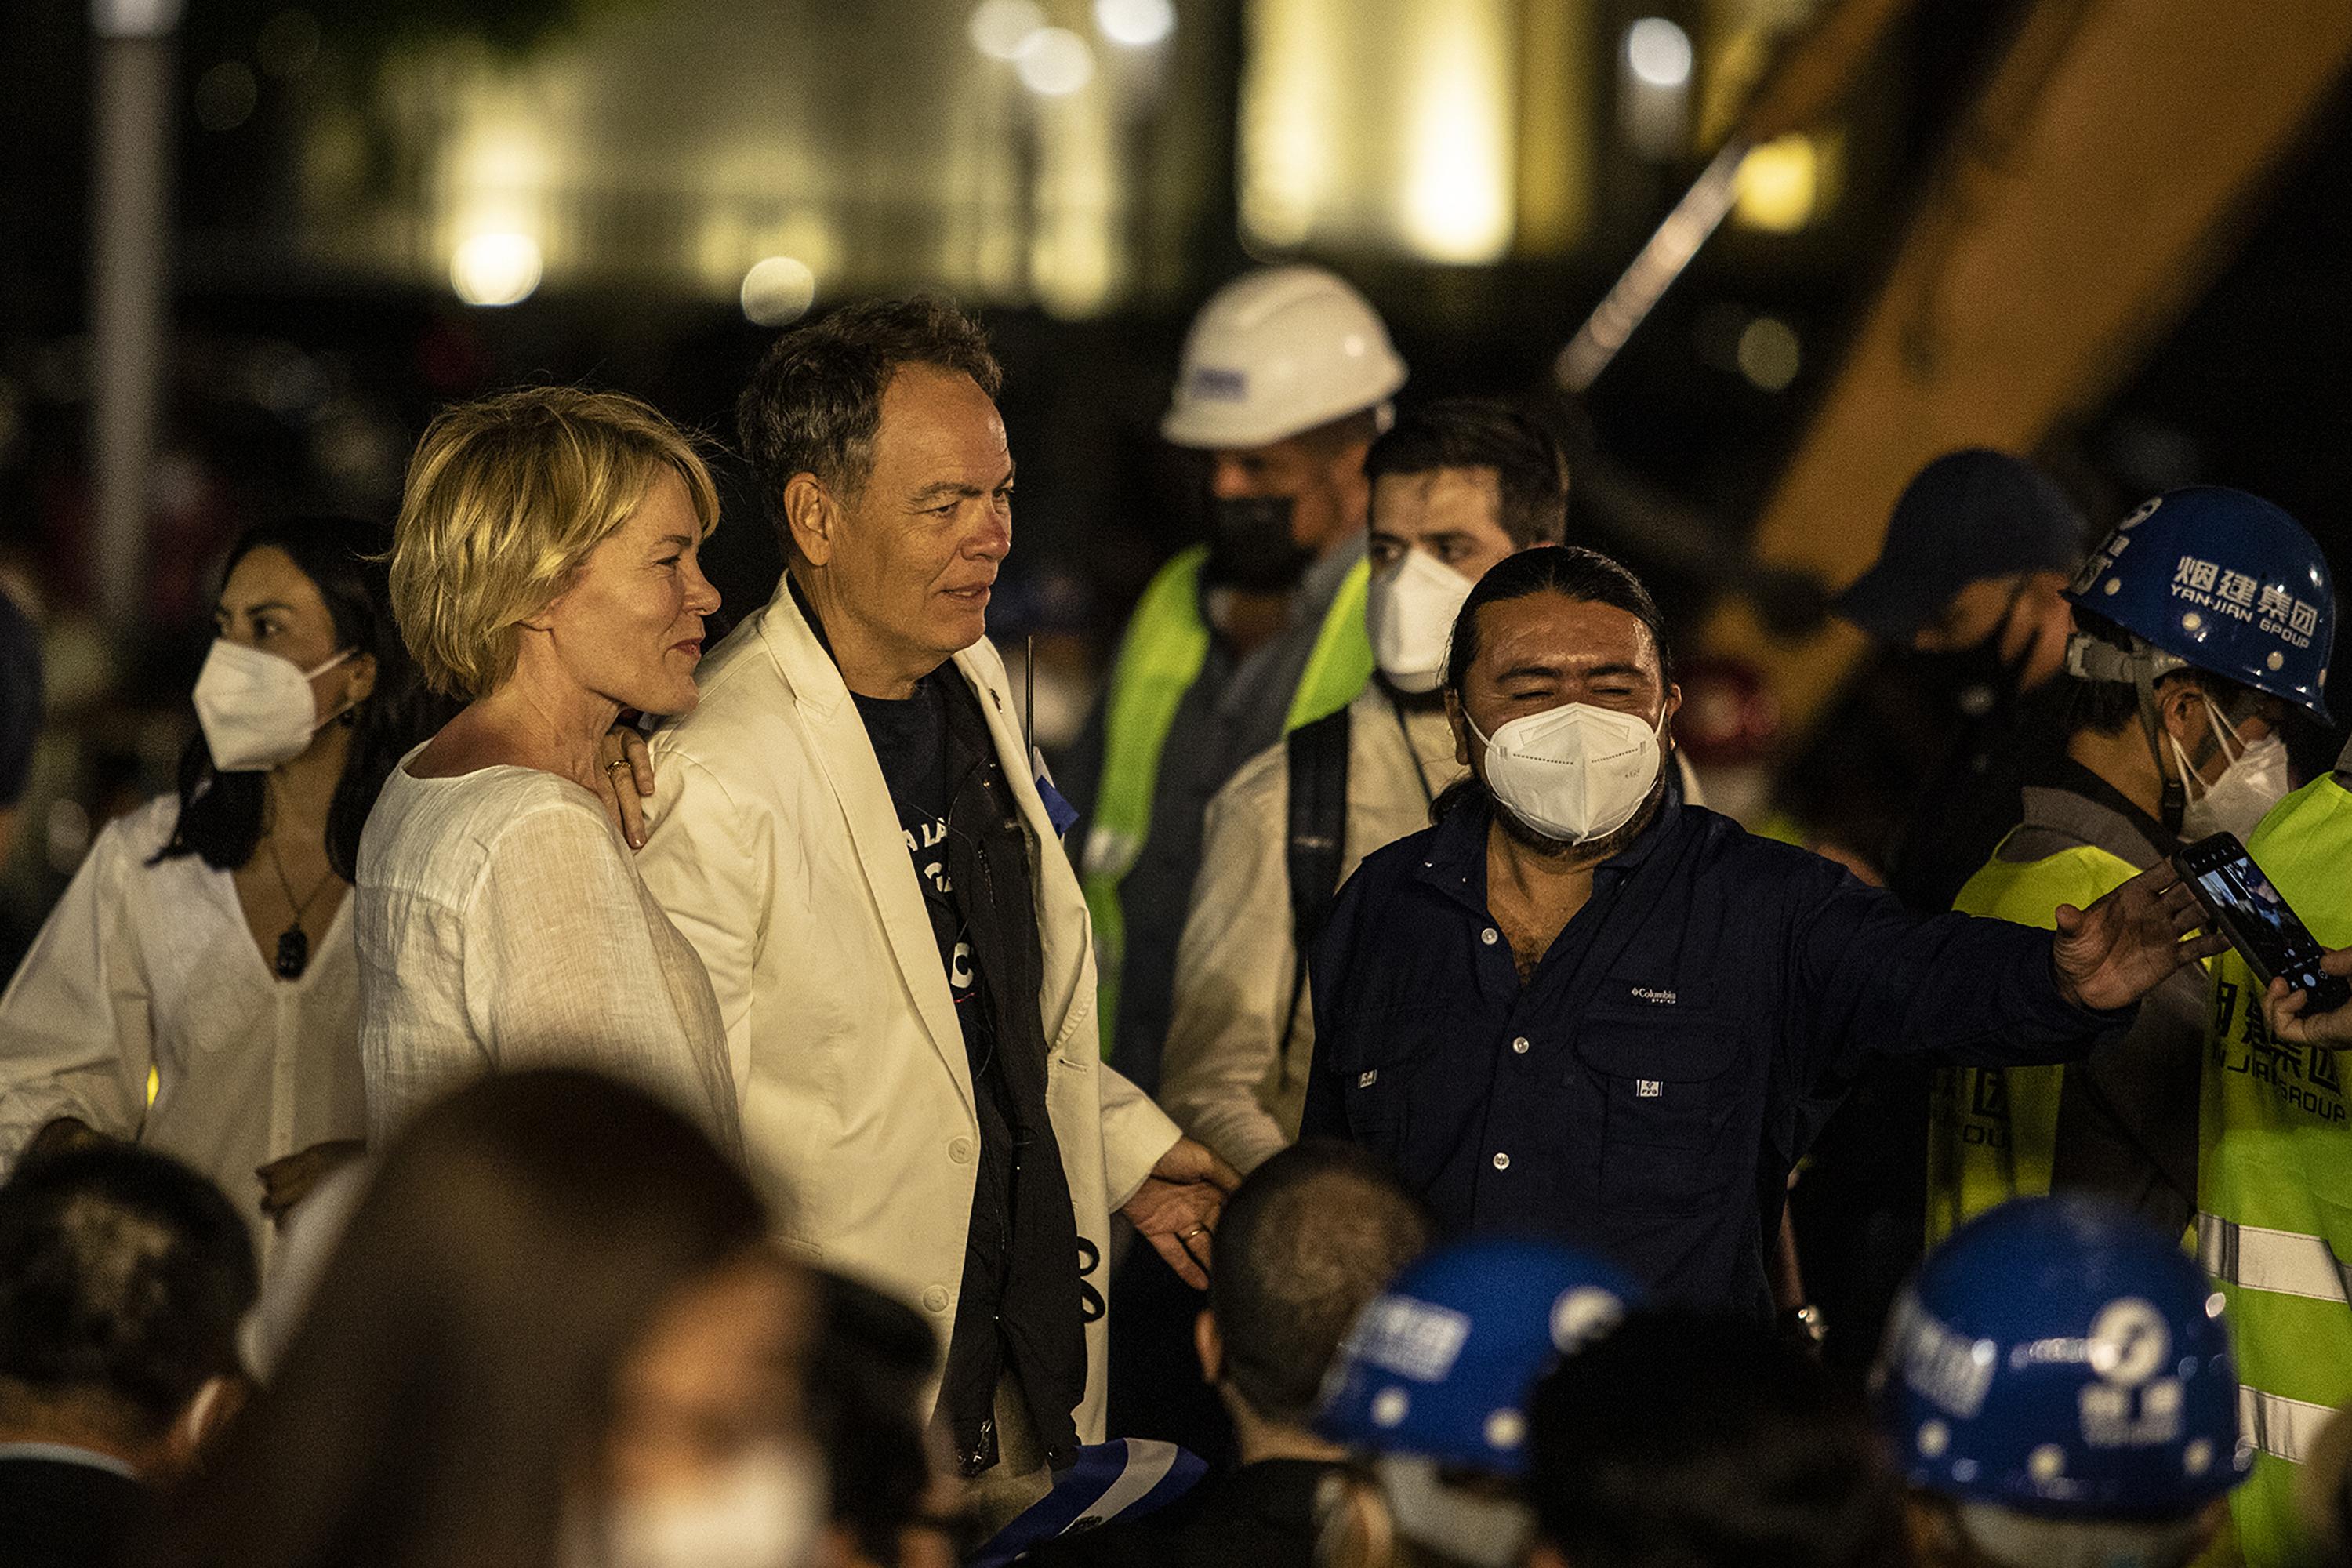 In events organized by the Bukele administration, it is common to see Bitcoin gurus Max Keiser and Stacy Herbert attend as special guests. Photo: Carlos Barrera/El Faro